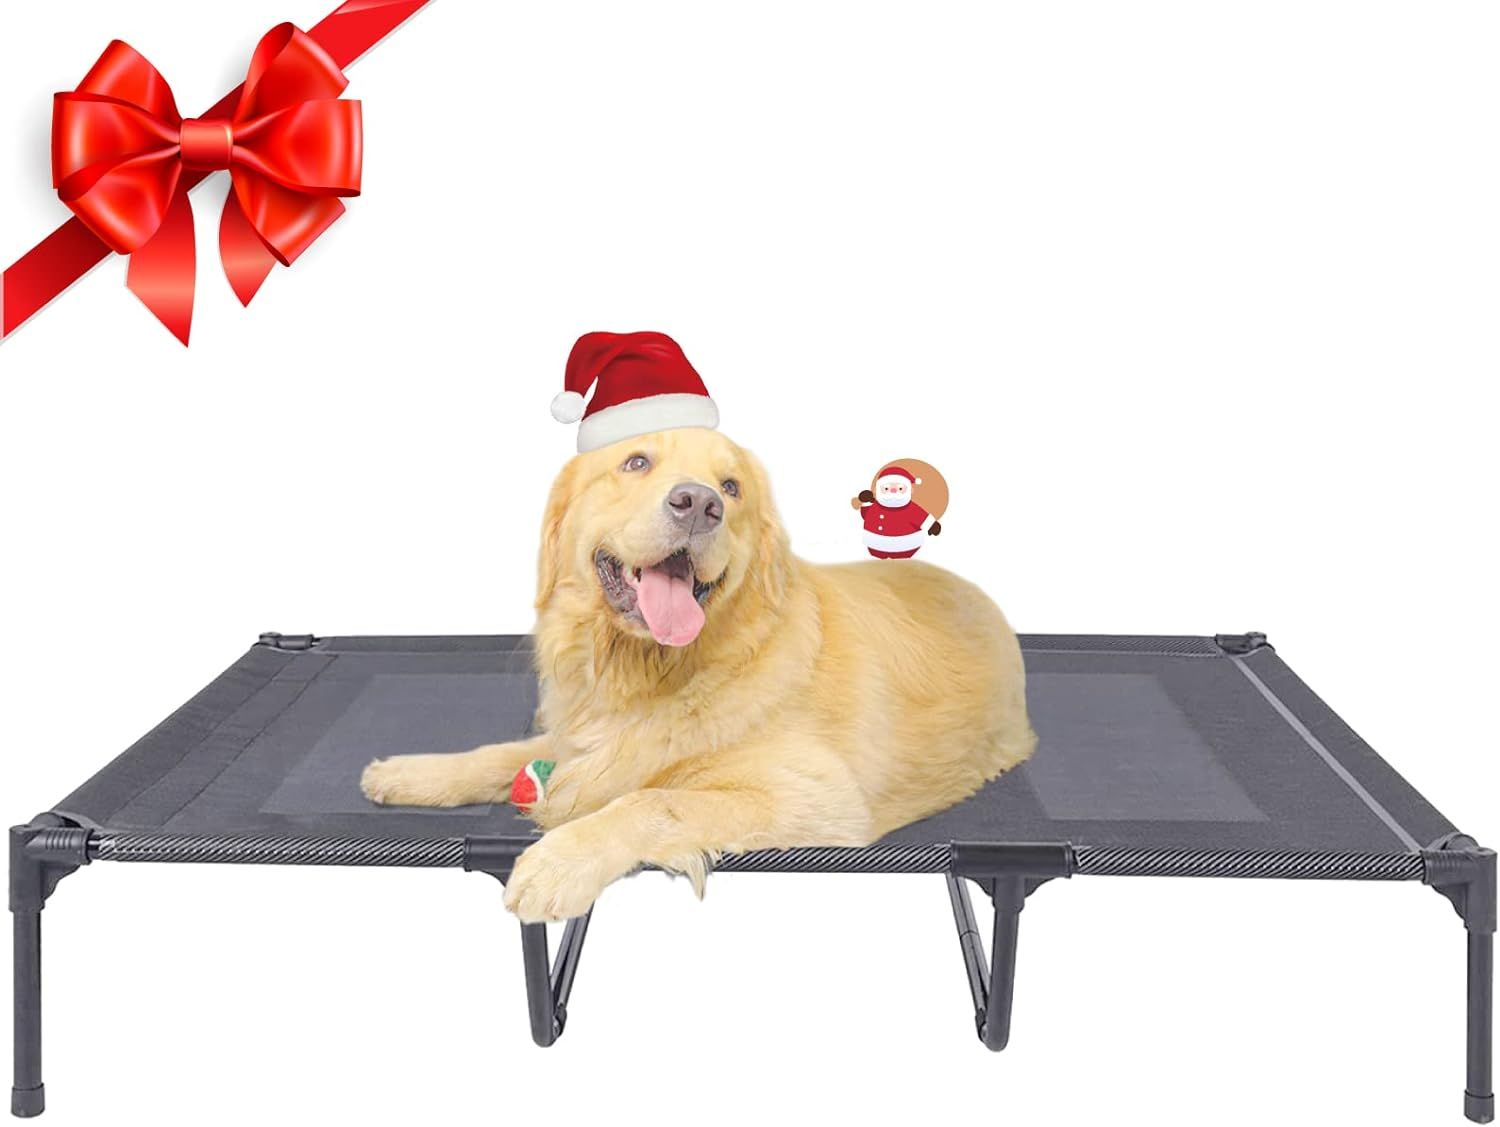 Raised bed platform for happy joints for large dogs like Rottweilers